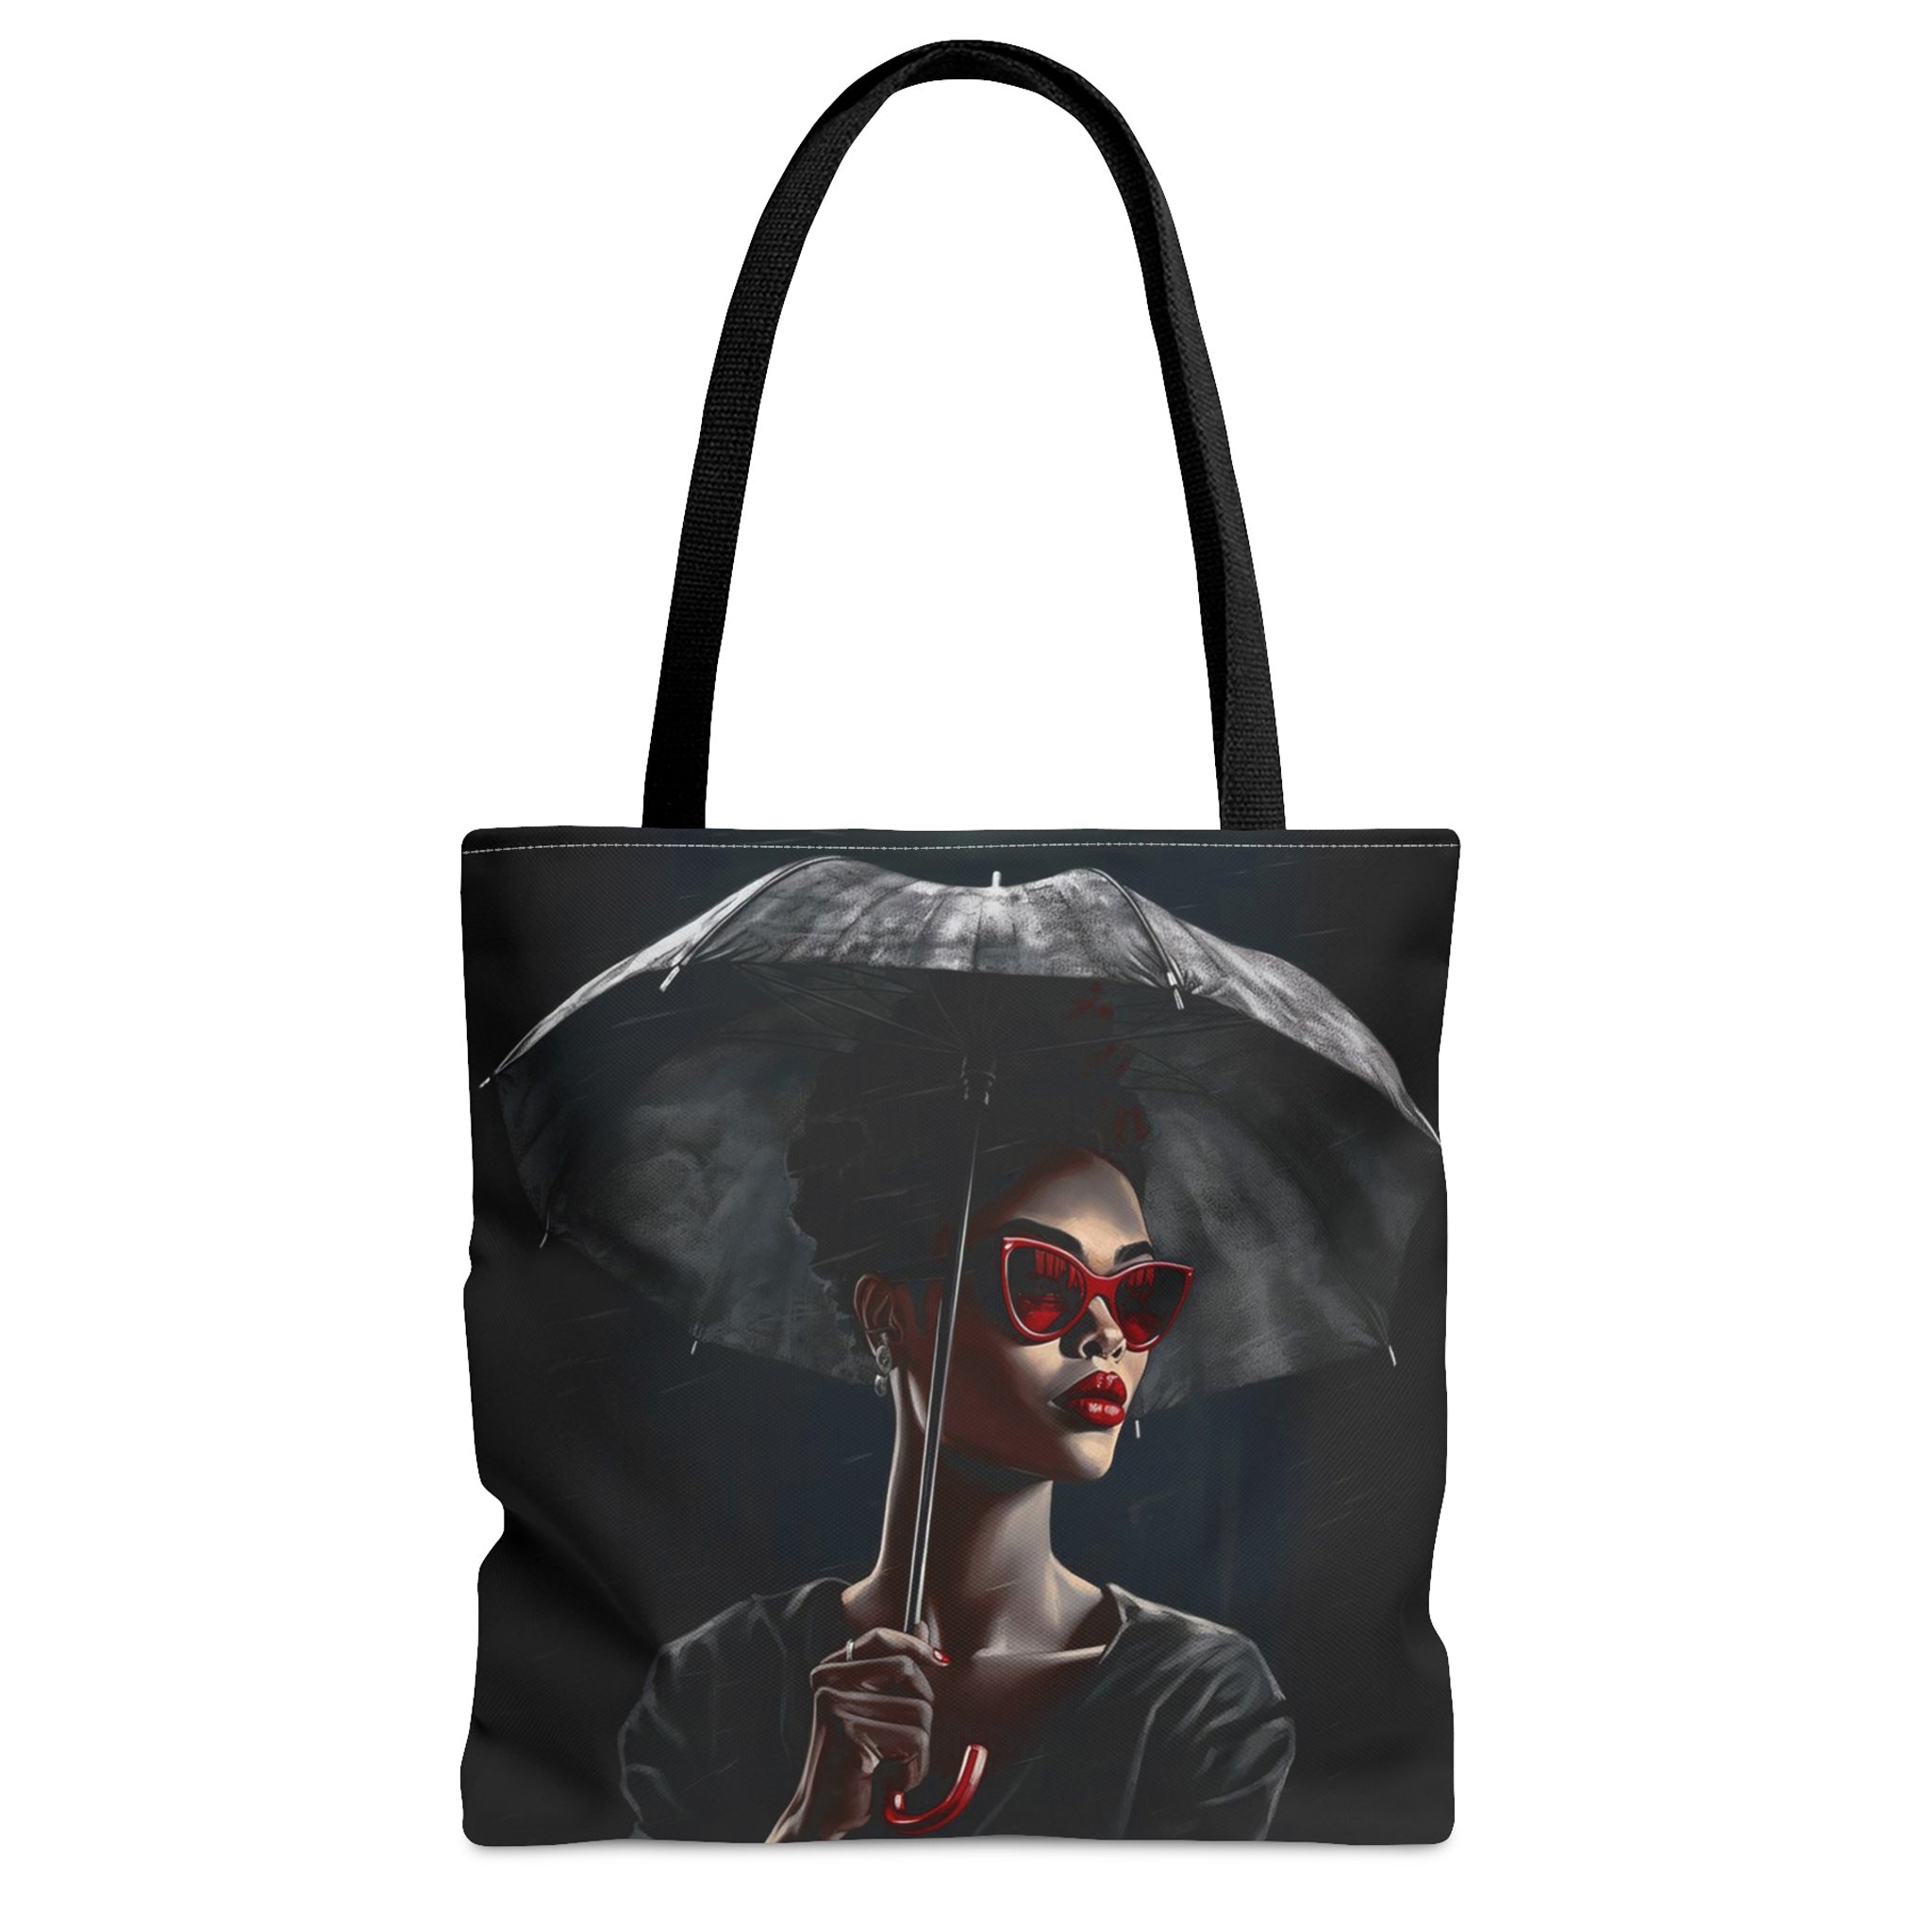 Black Fashionista Tote Bag Stormy Weather - front view.